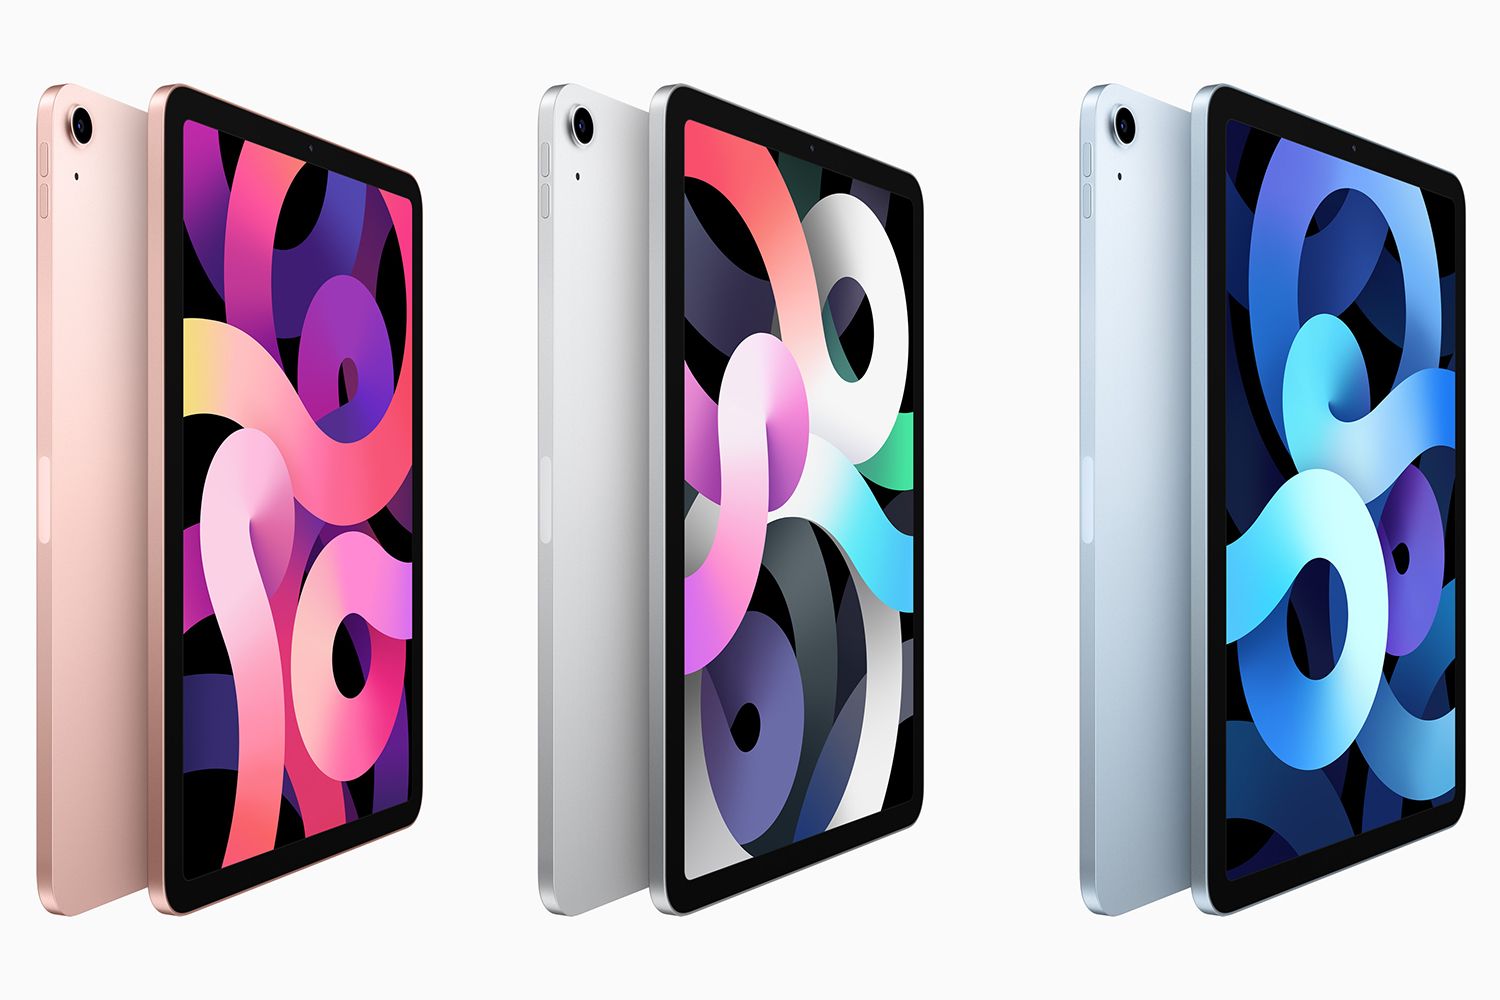 Three models of iPad Air 2020 / iPad Air in profile with three colors